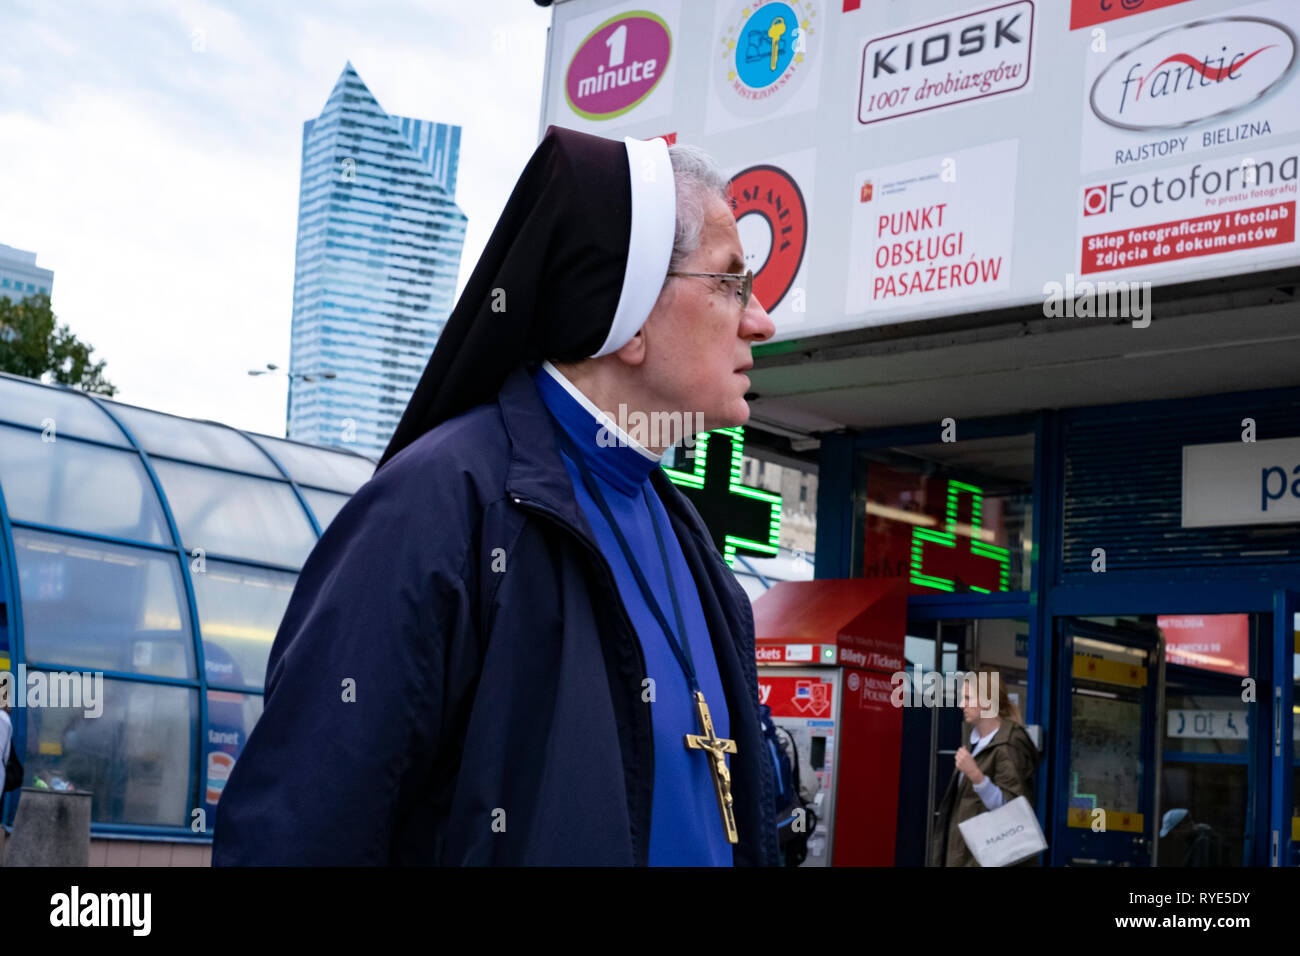 A Catholic nun in her habit and cross heads to a metro in central Warsaw, Poland Stock Photo